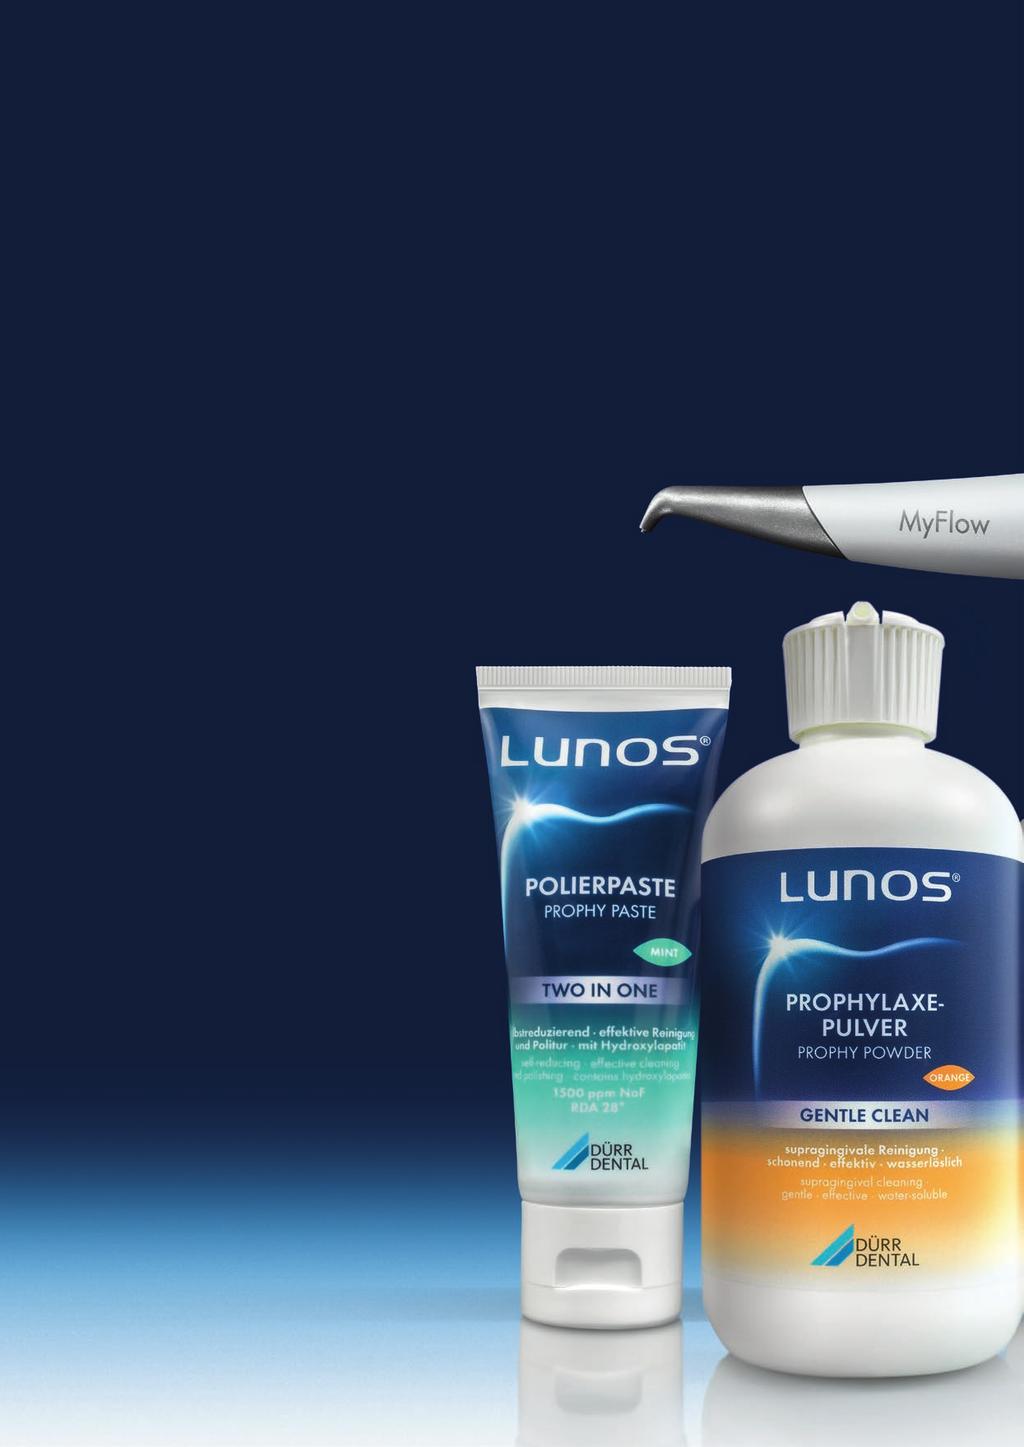 LUNOS RADIANT SMILES ALL ROUND. Lunos is the new premium prophylaxis system from Dürr Dental.